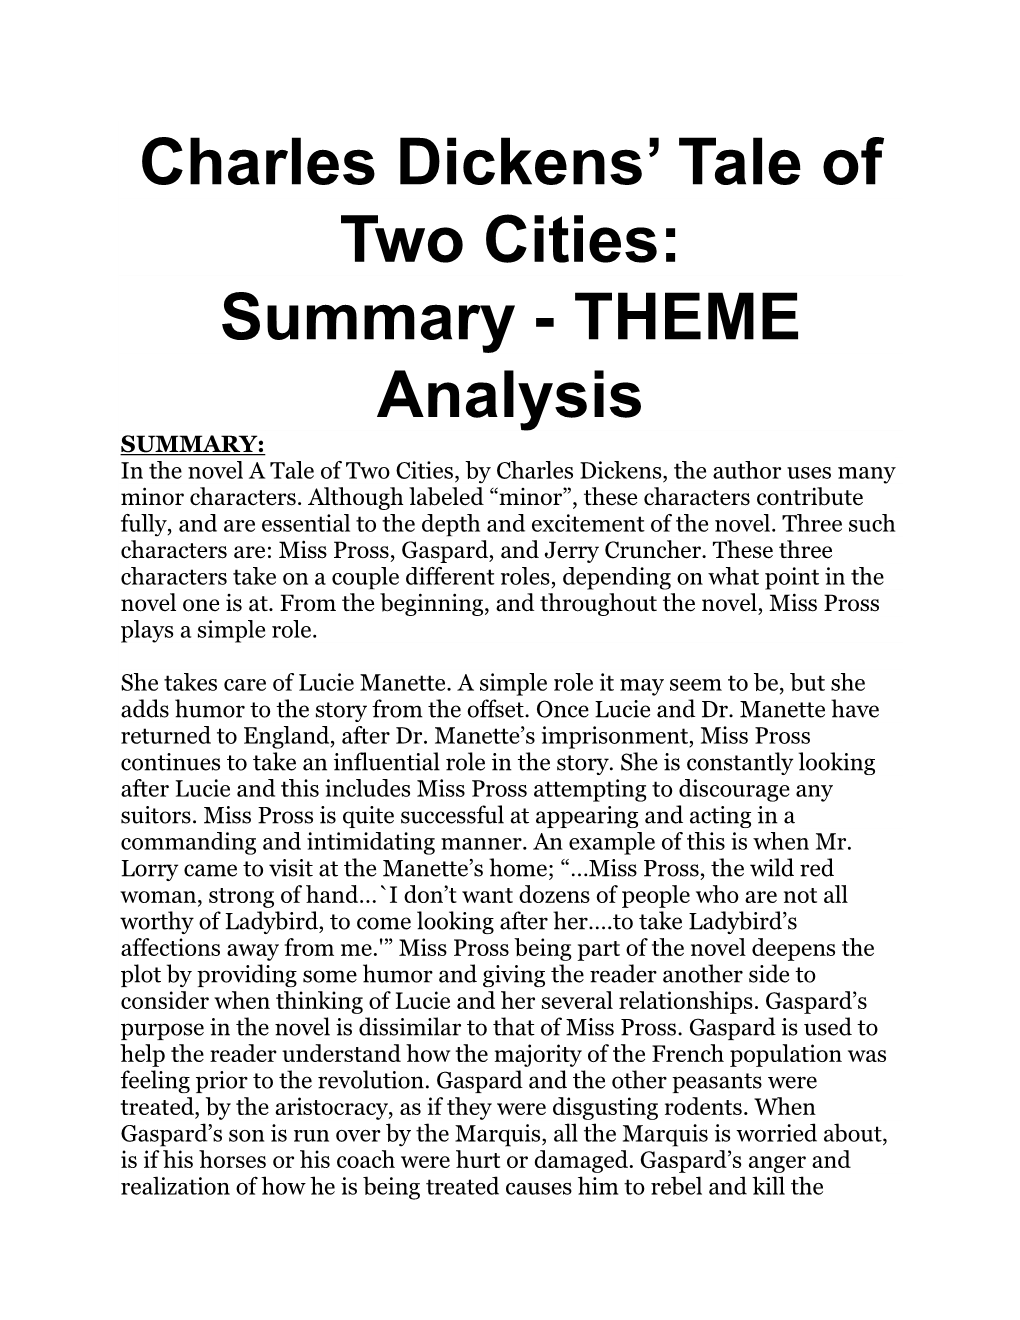 Charles Dickens' Tale of Two Cities: Summary